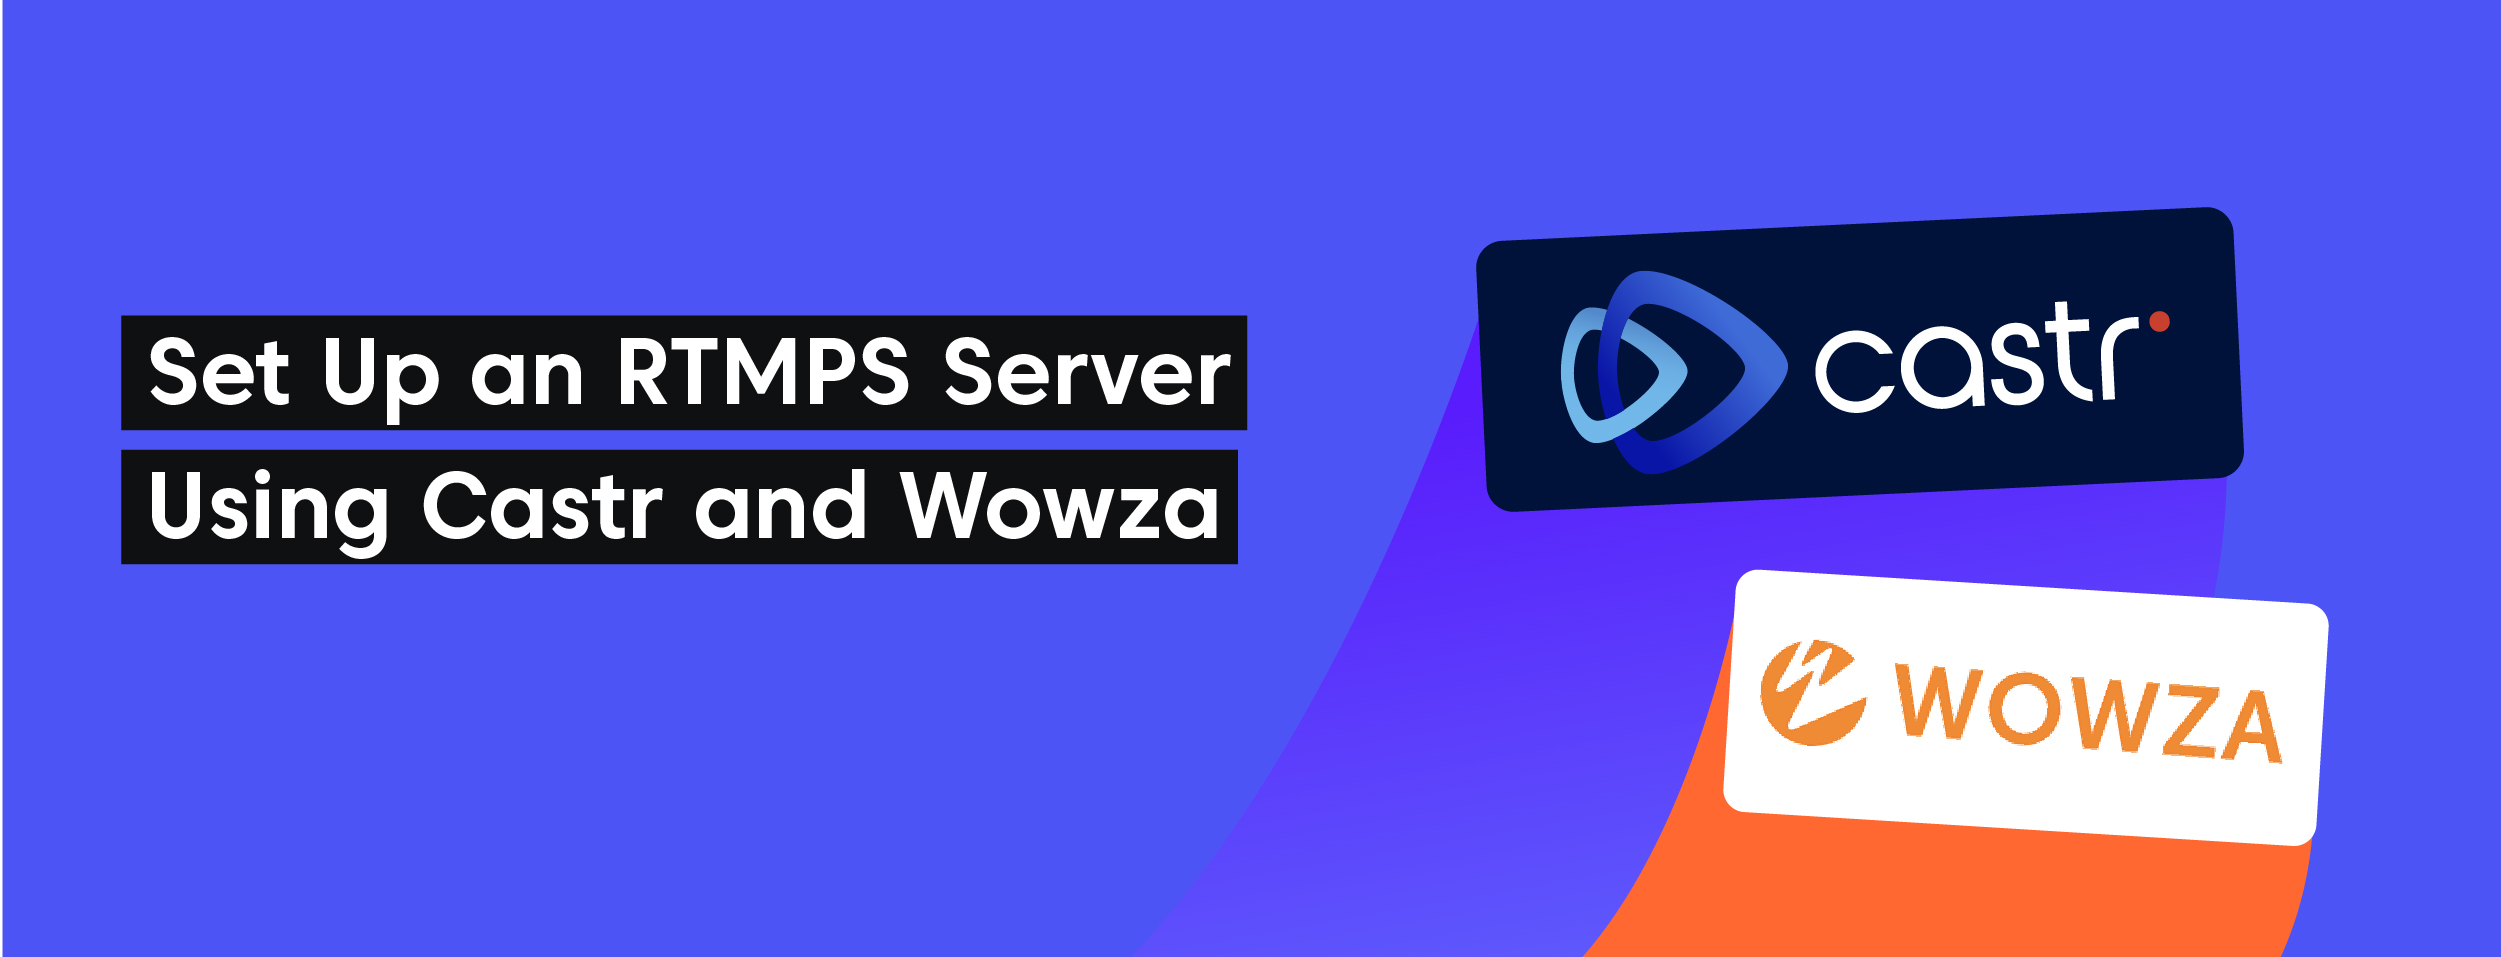 How to Set Up an RTMPS Server Using Castr and Wowza